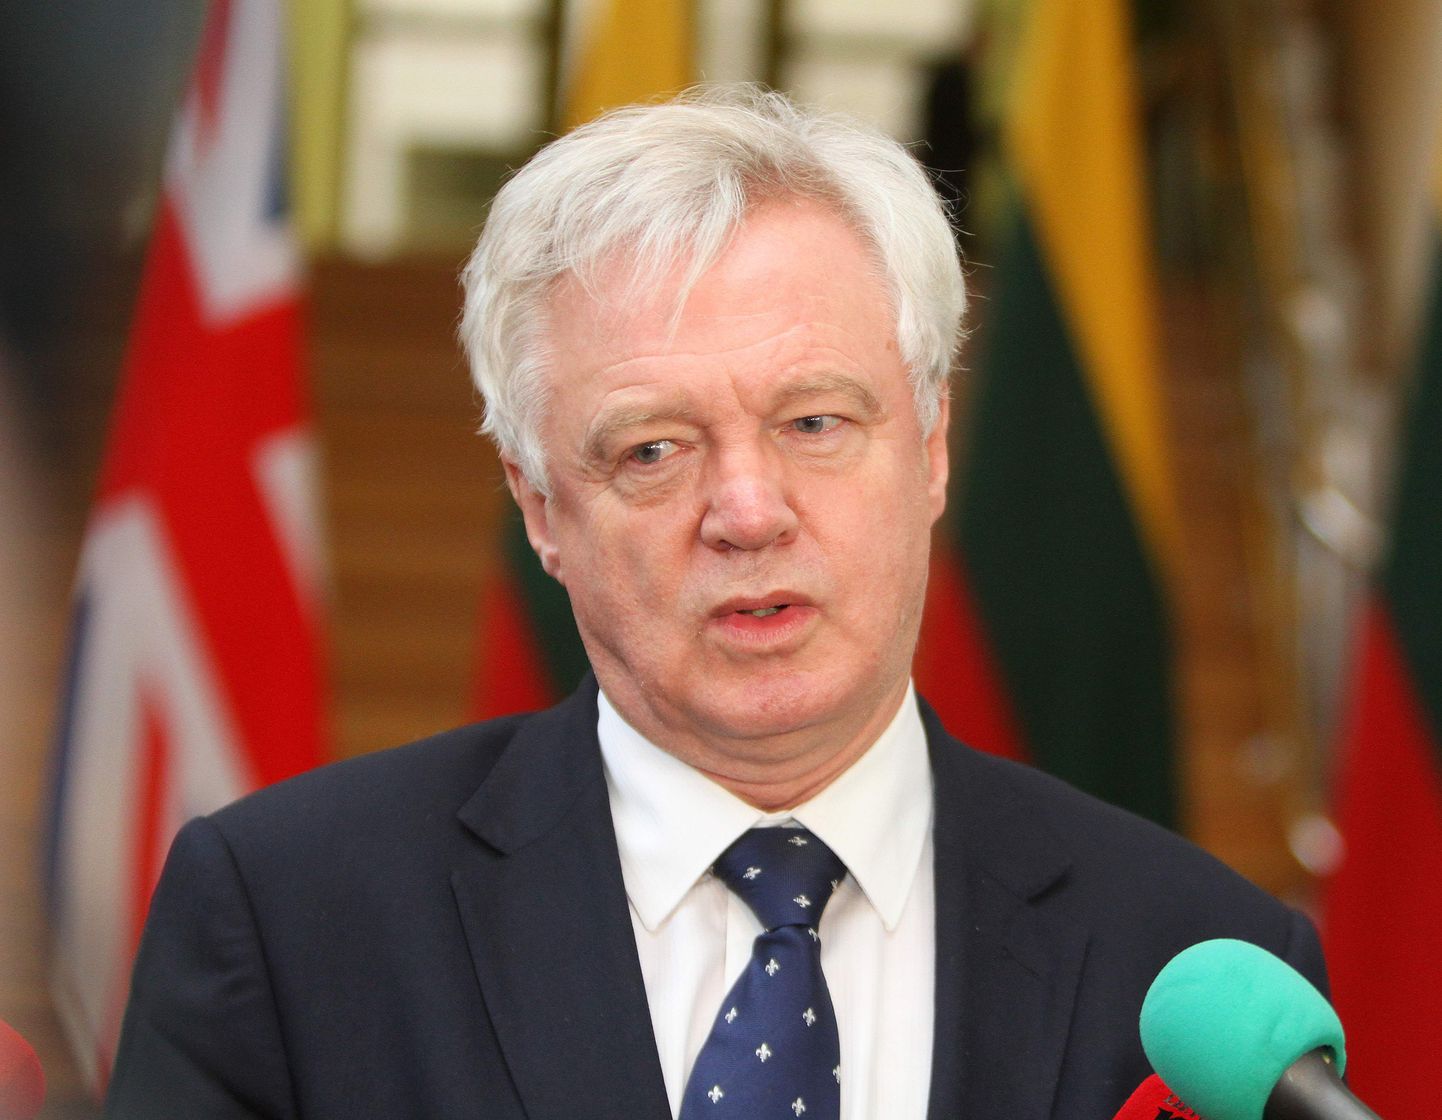 British Secretary of State for Exiting the European Union (Brexit Minister) David Davis is pictured during a press conference after a meeting with Lithuanian Prime Minister in Vilnius on February 21, 2017. / AFP PHOTO / Petras Malukas